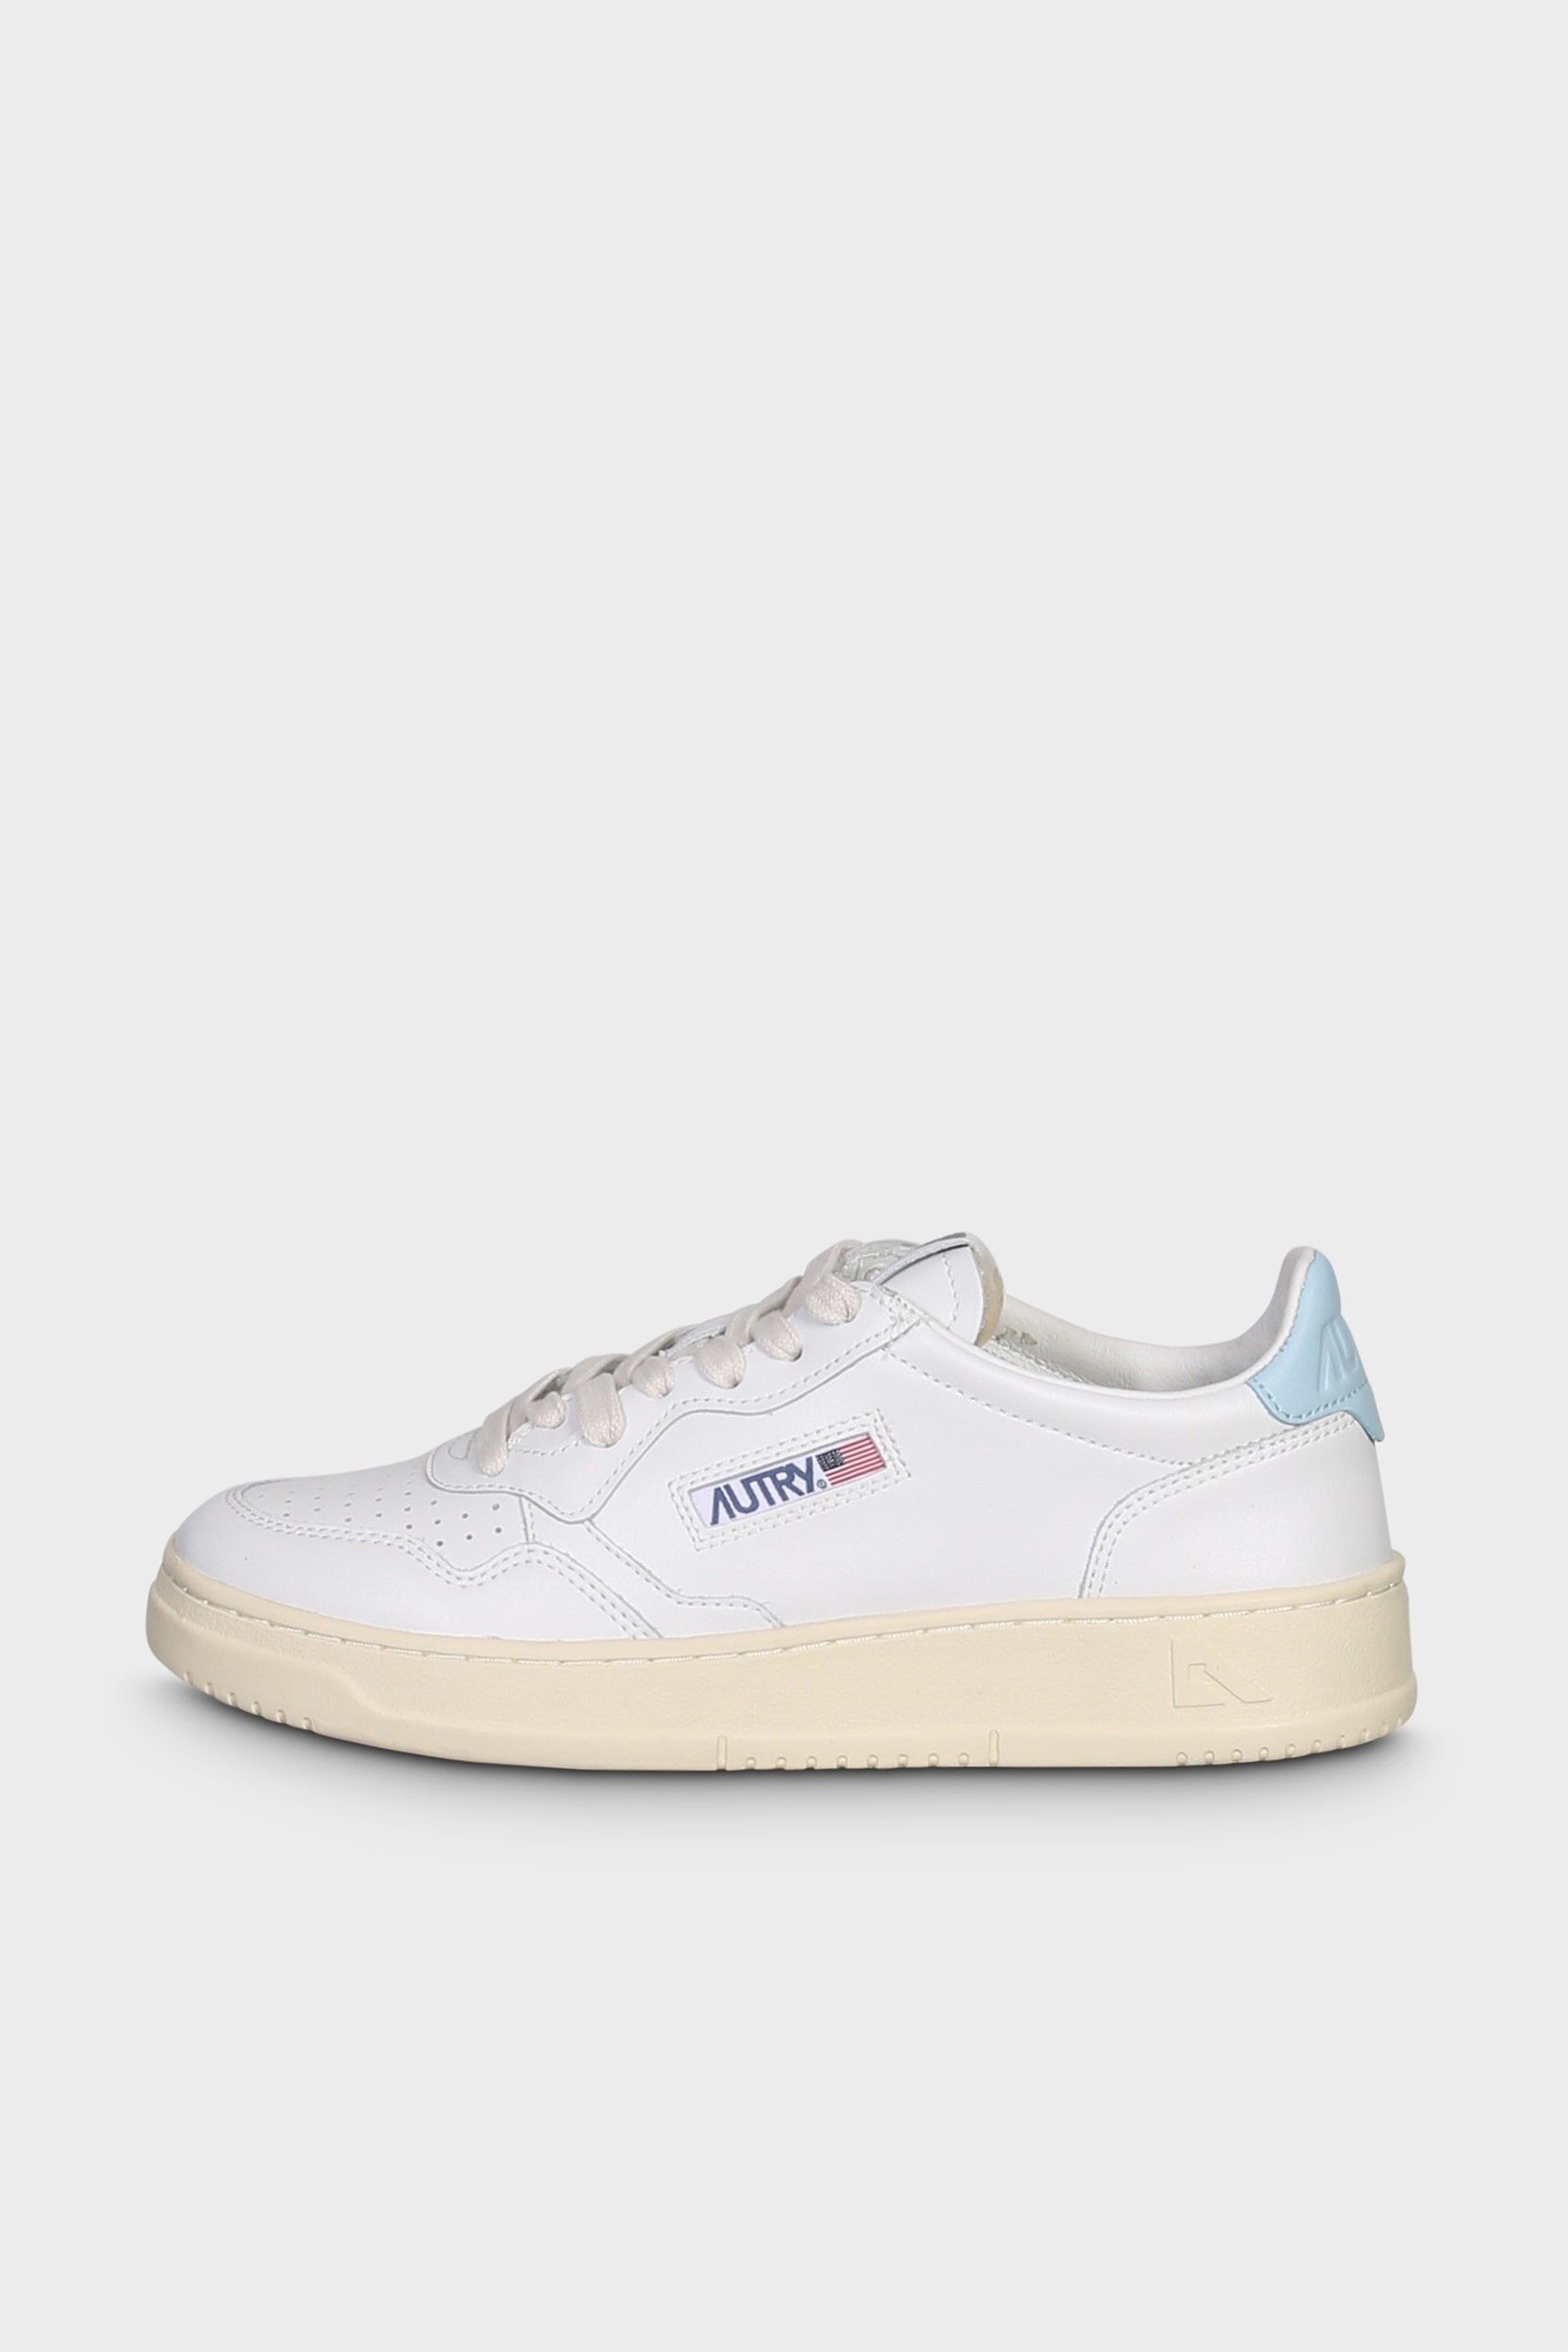 AUTRY ACTION SHOES Medalist Low Sneaker White/Stream Blue 46